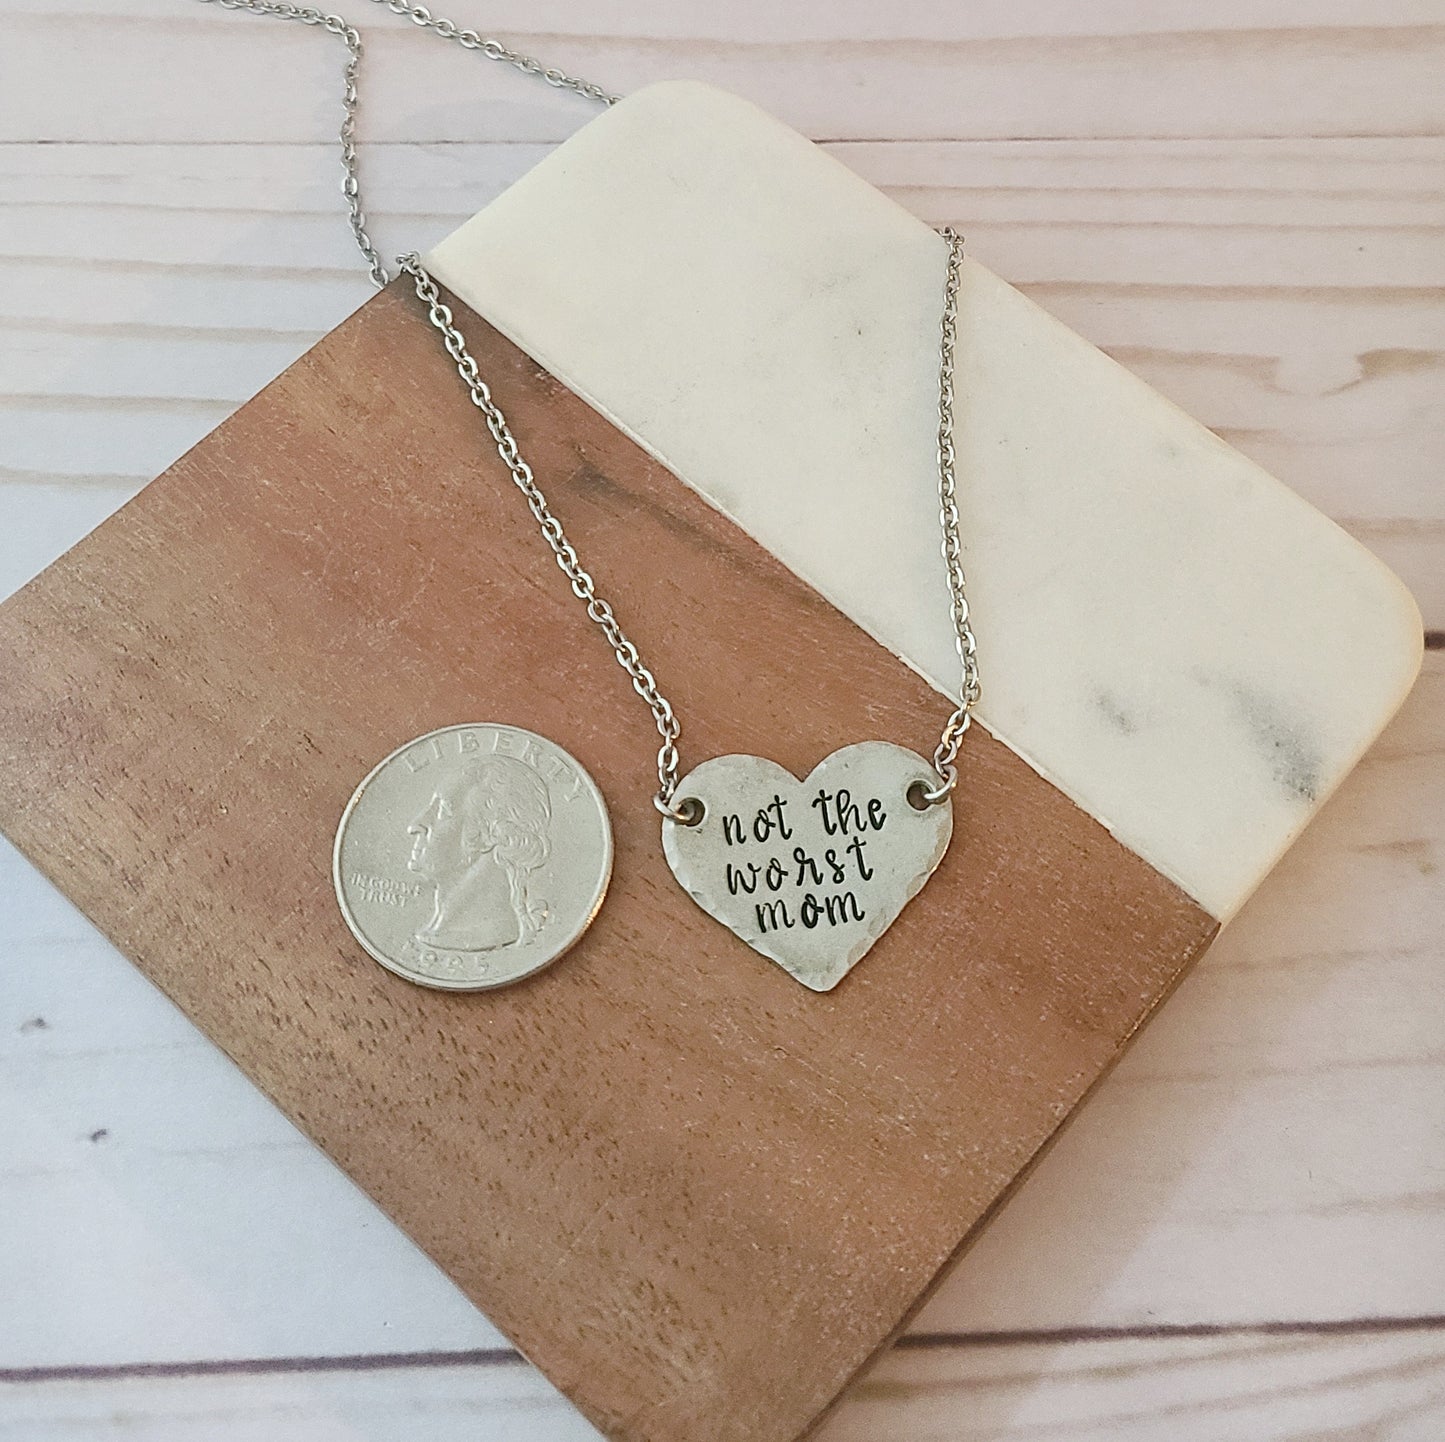 Not The Worst Mom Heart Necklace